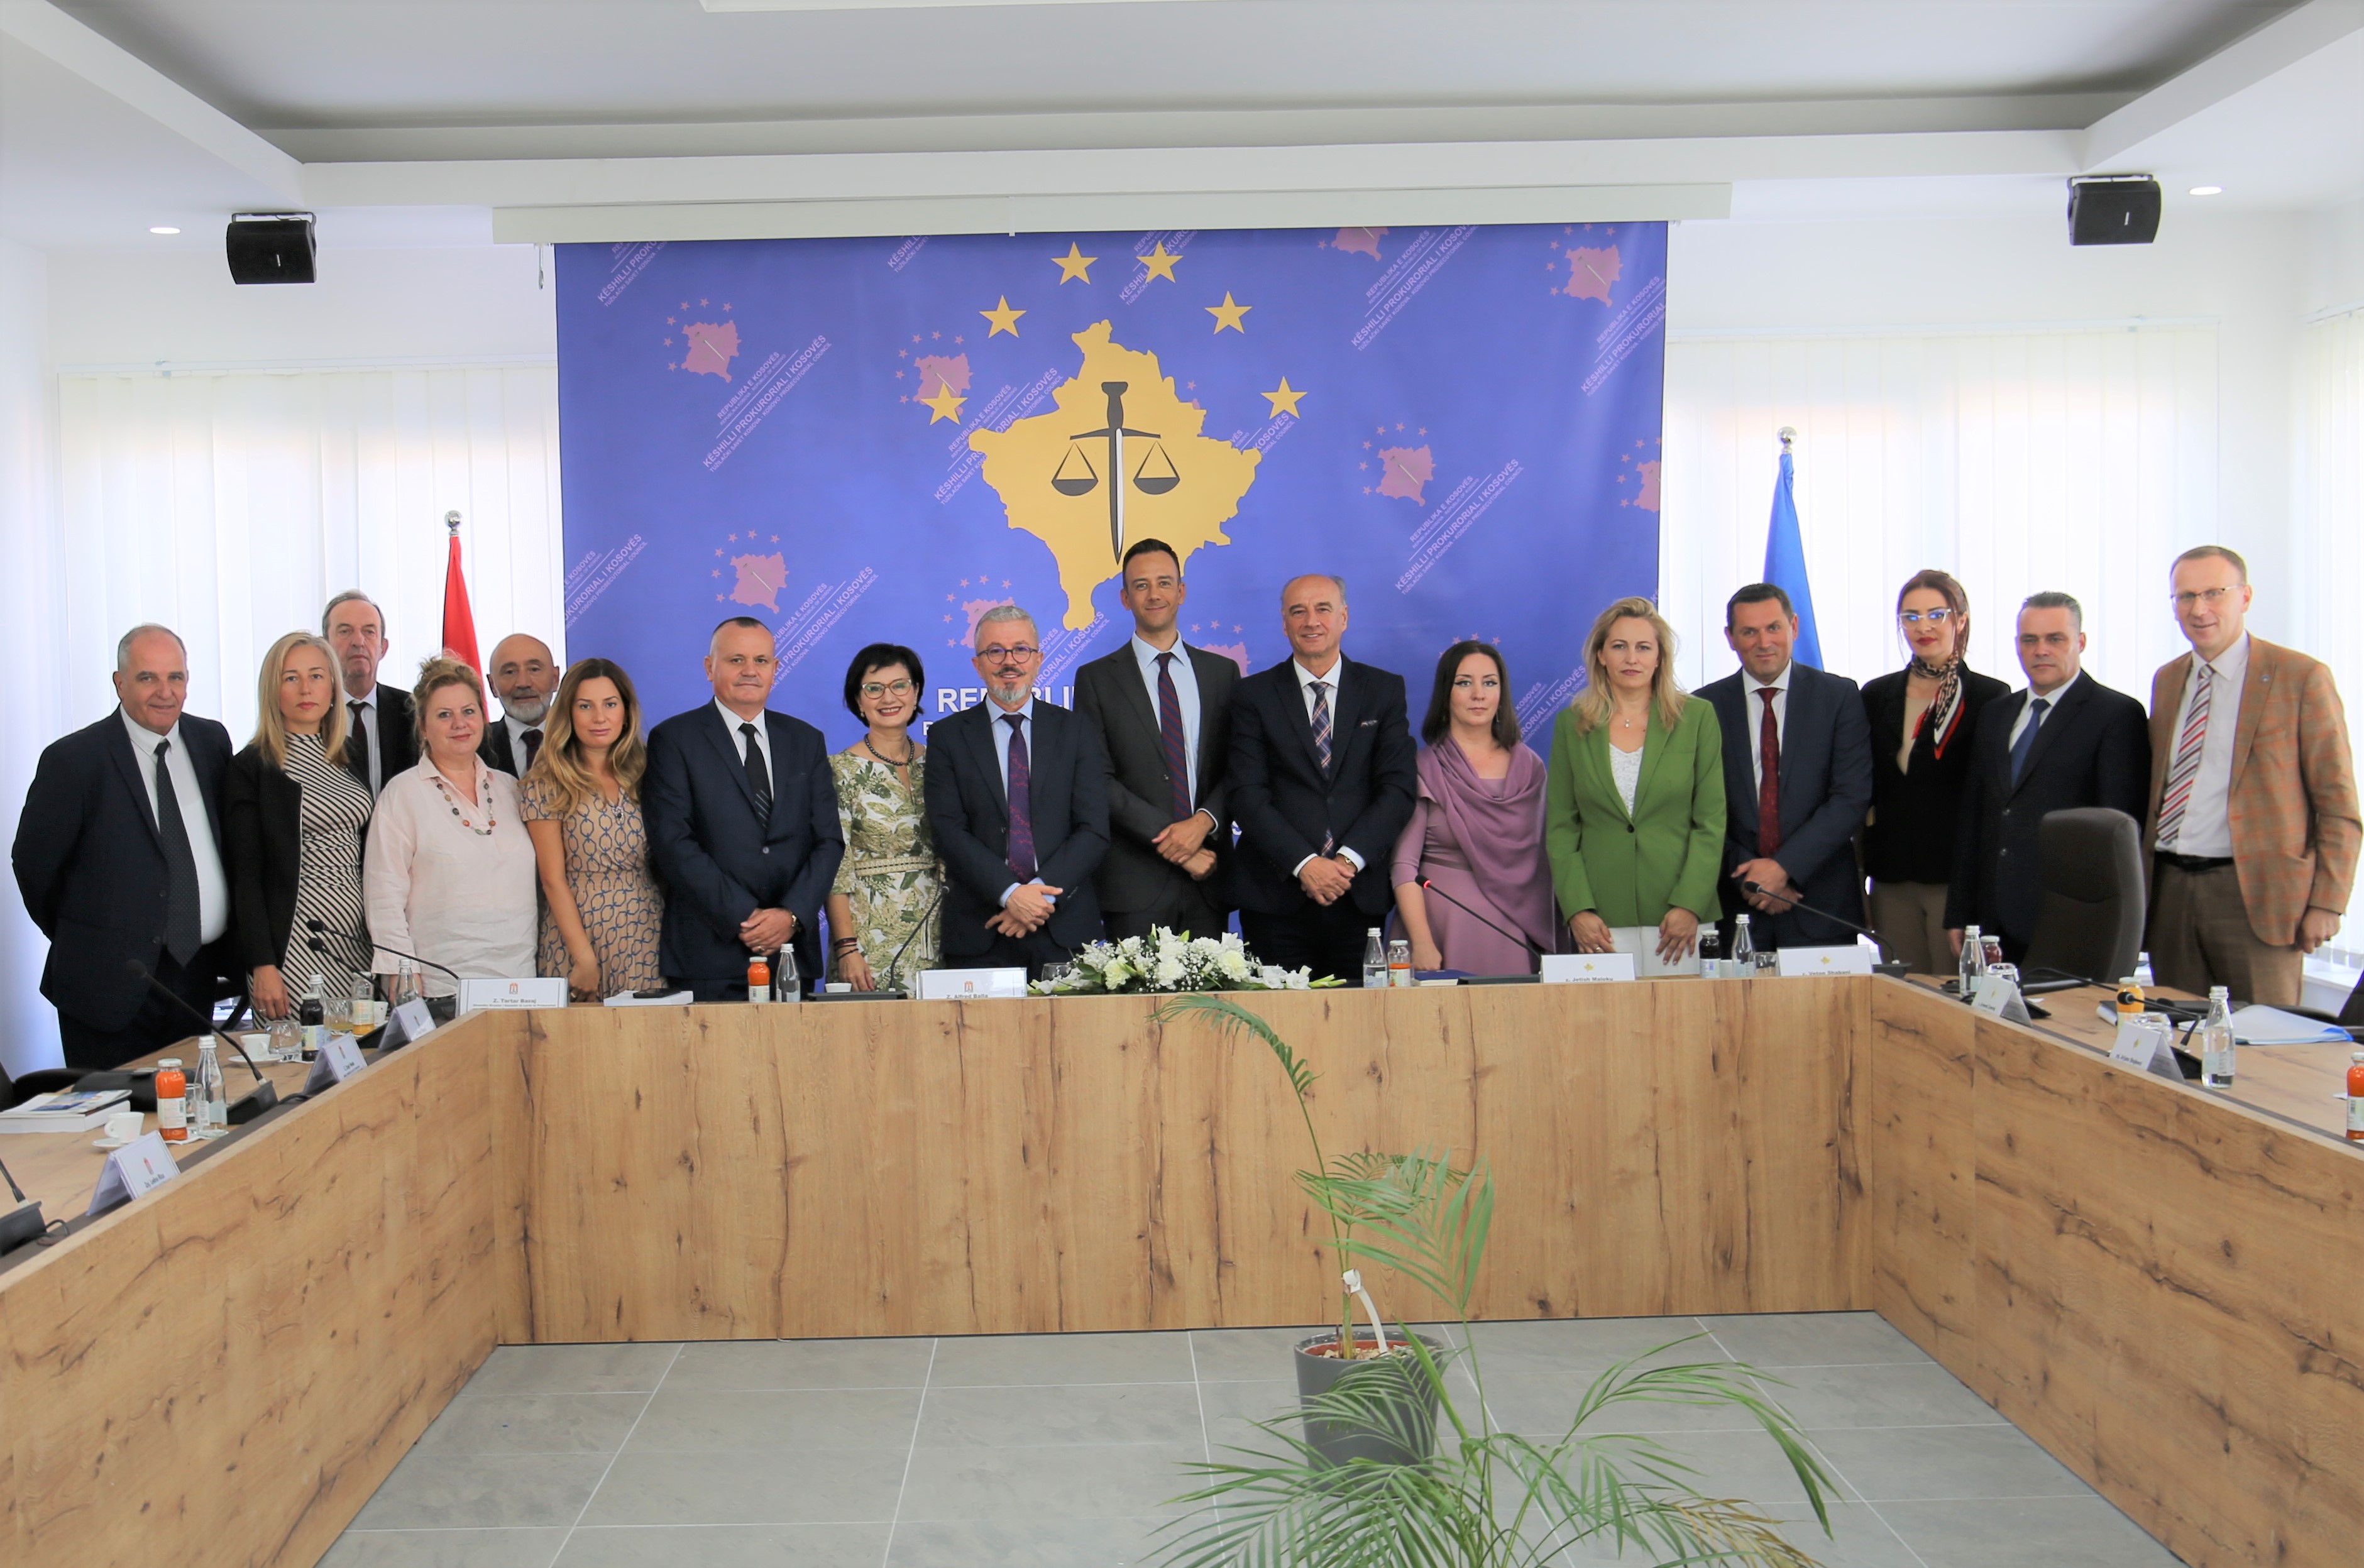 Chairman Maloku hosted the representatives of the High Council of the Prosecution of Albania in a meeting